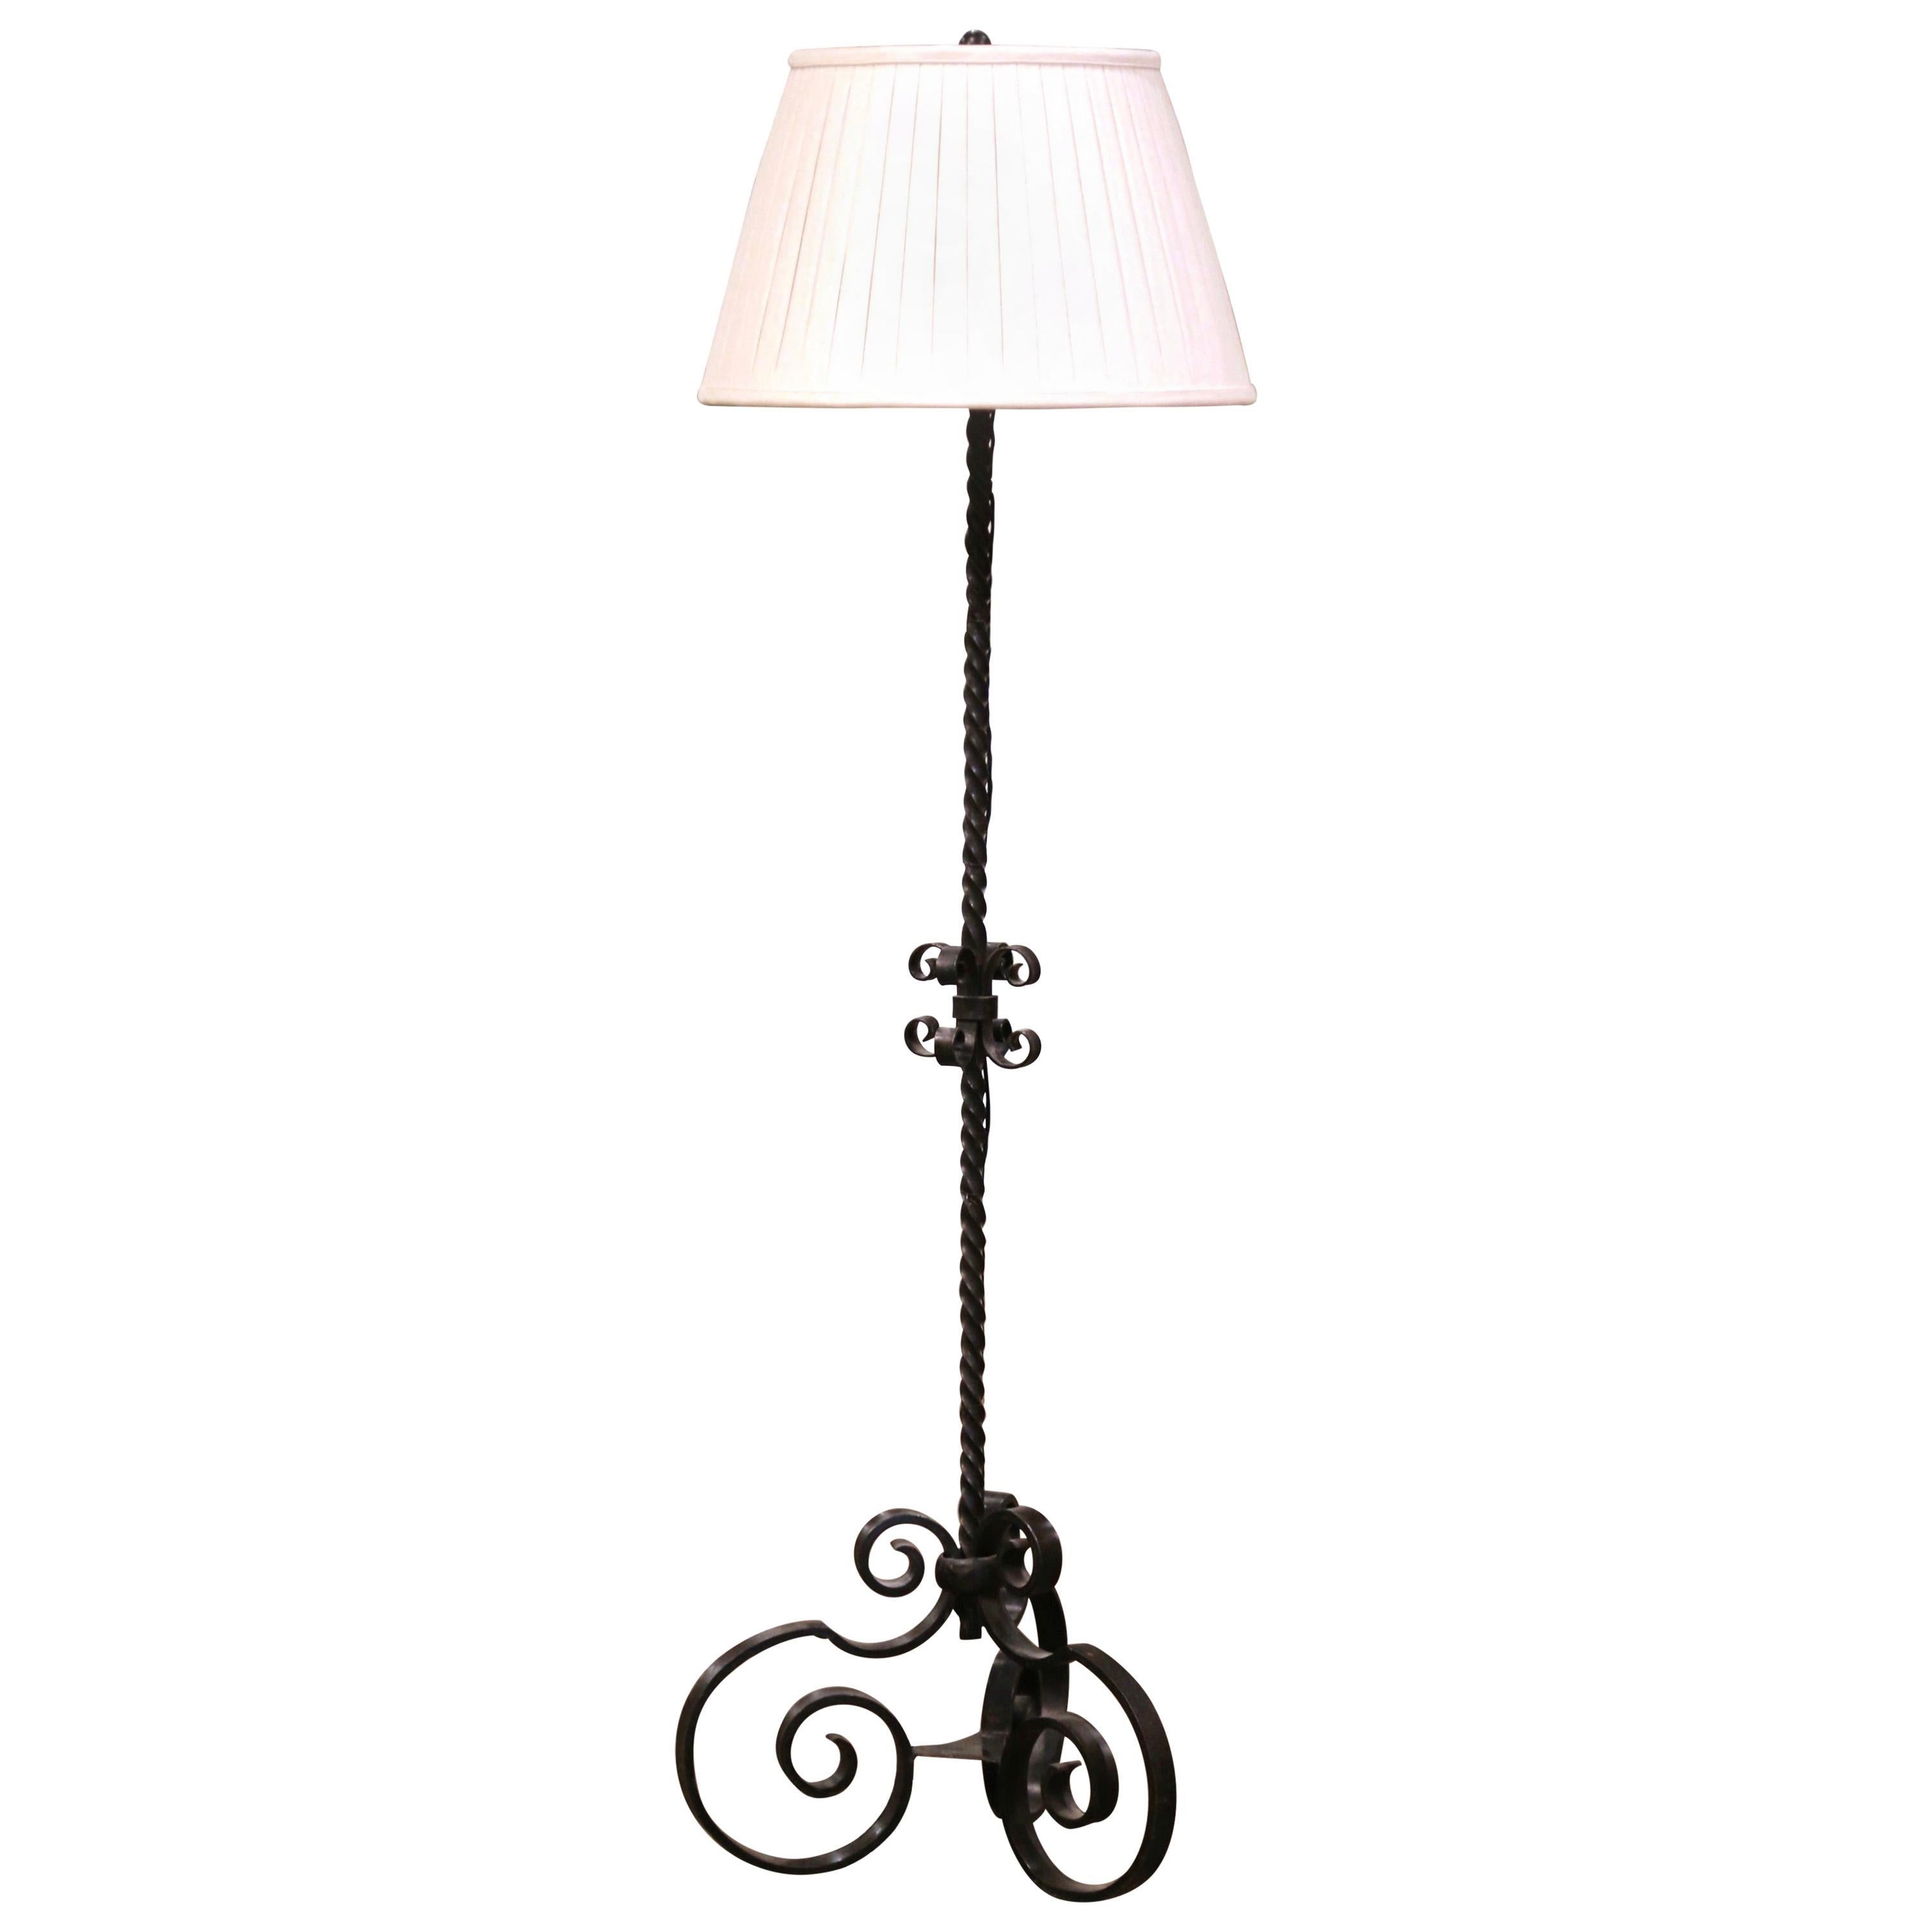 Early 20th Century French Gothic Black Wrought Iron Floor Lamp